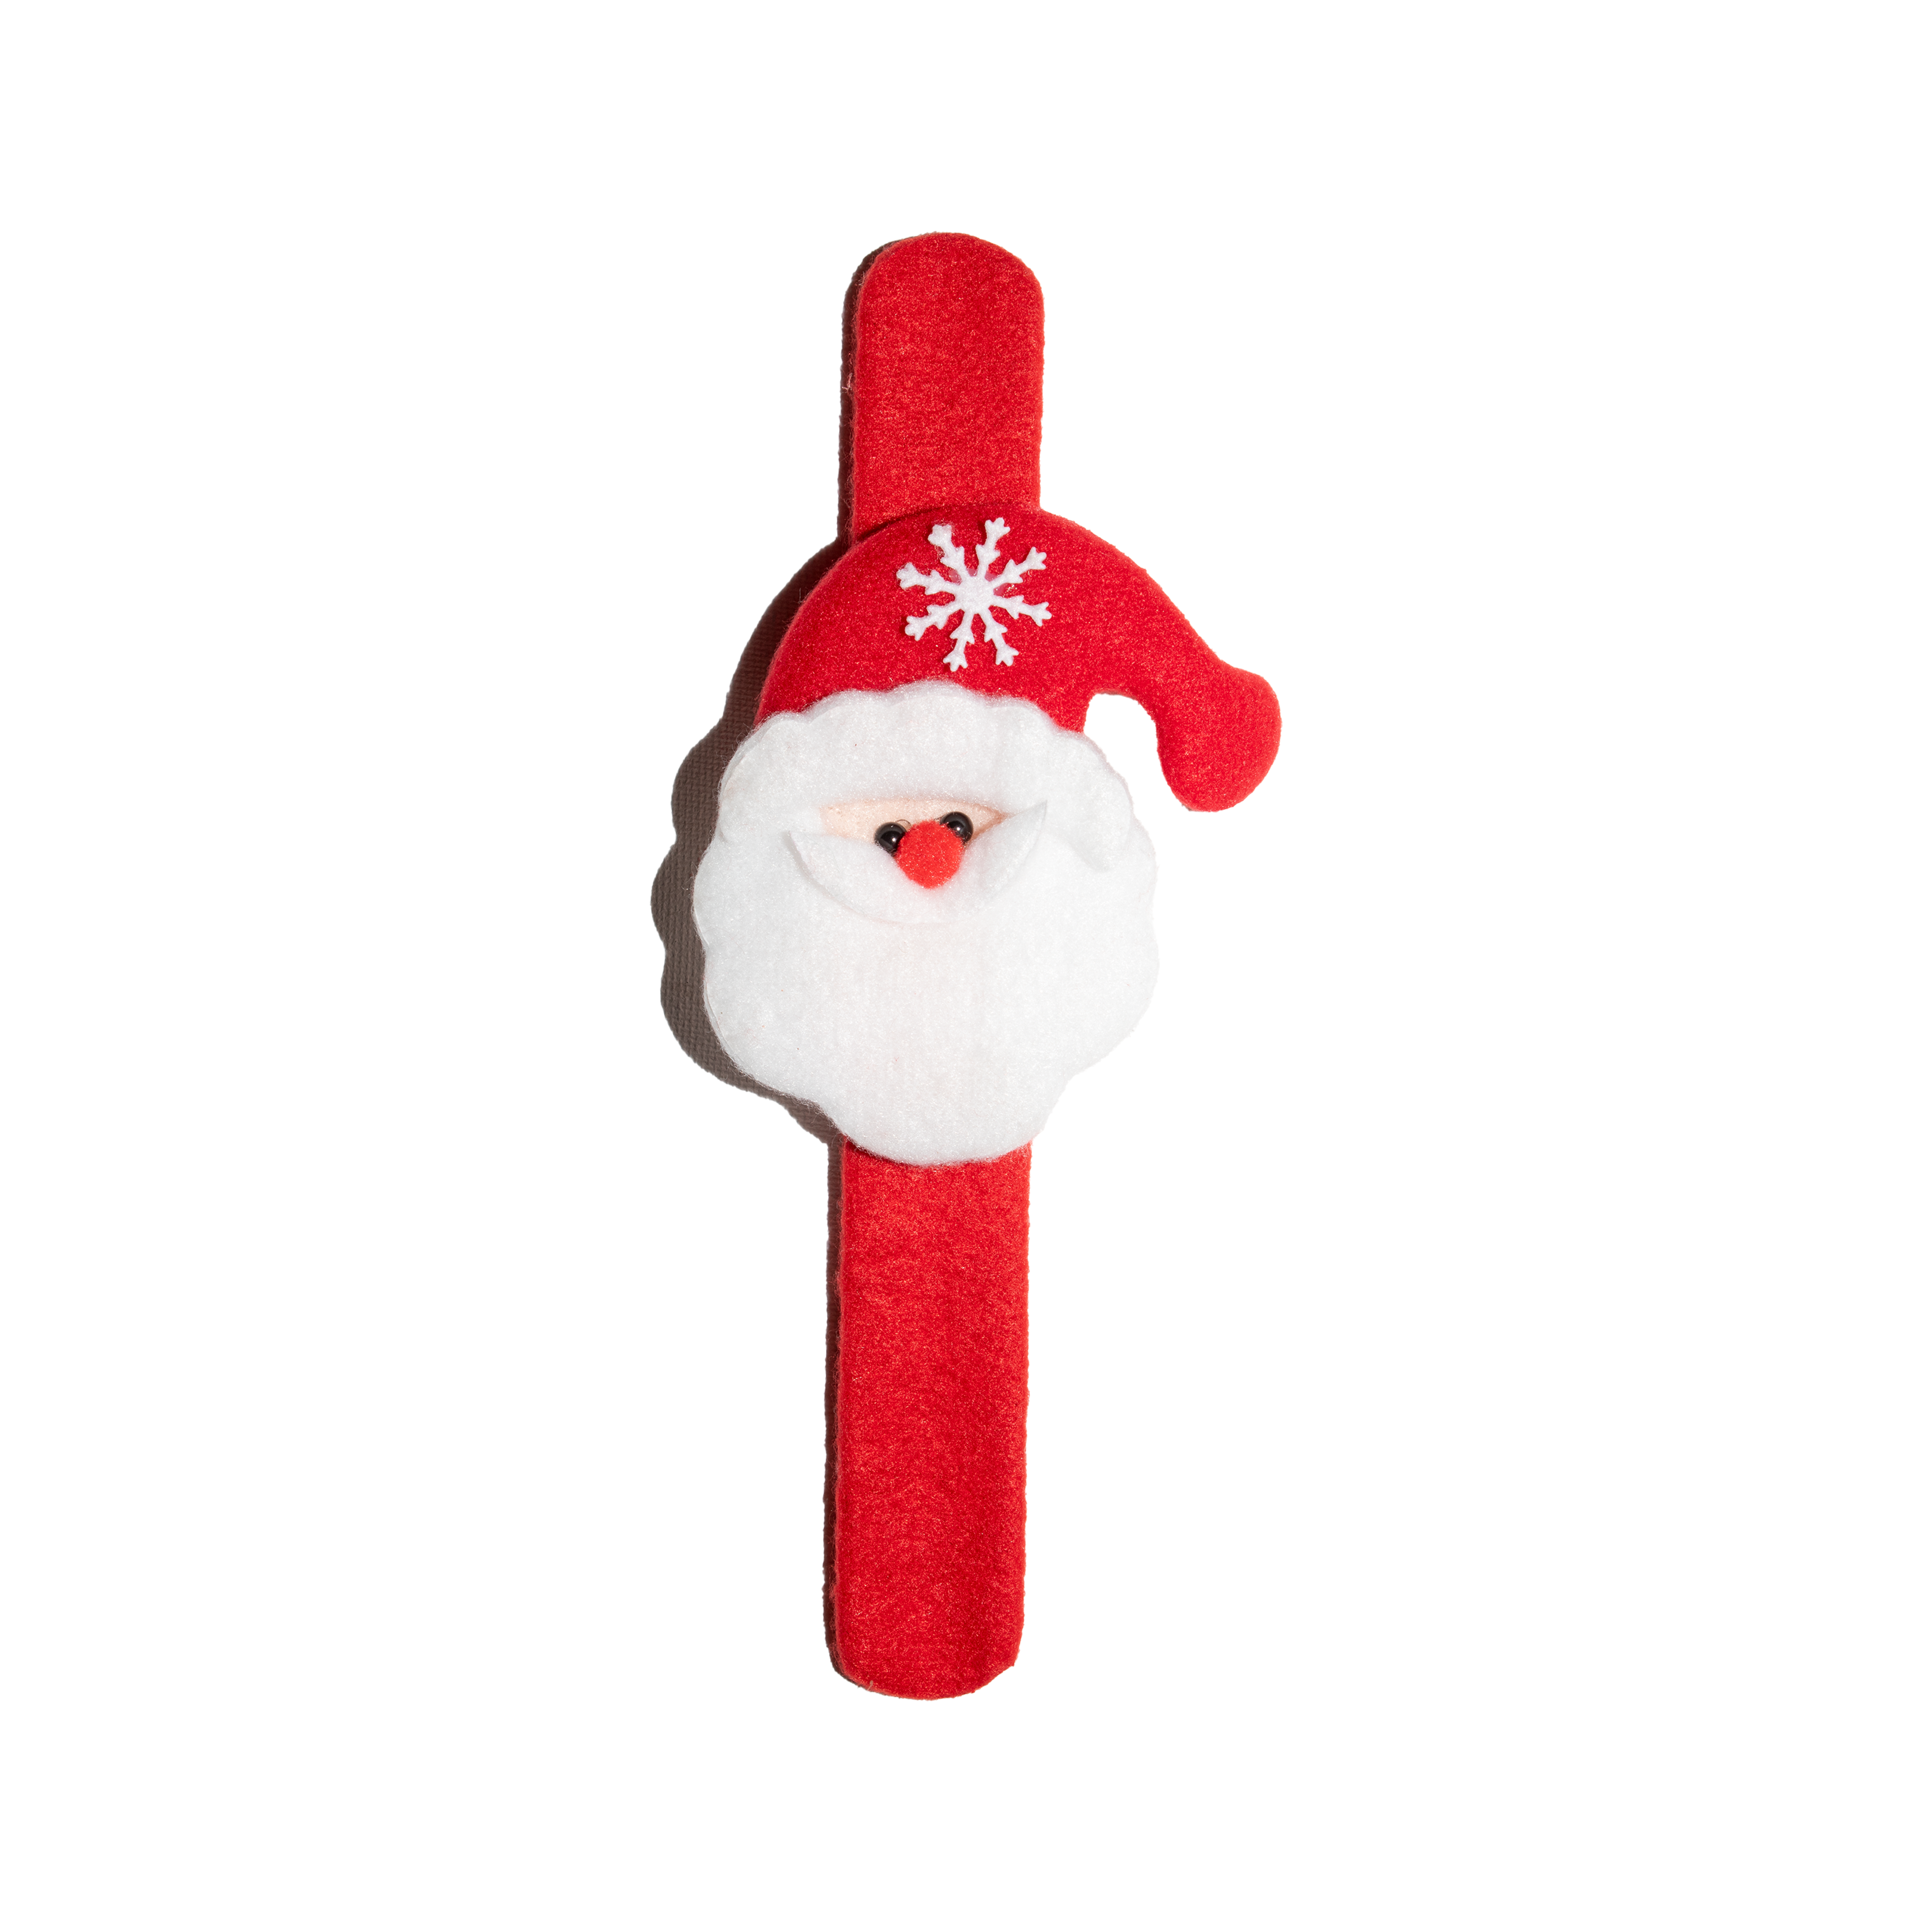 Itsy Bitsy Christmas Wrist Band Assorted Design- Red